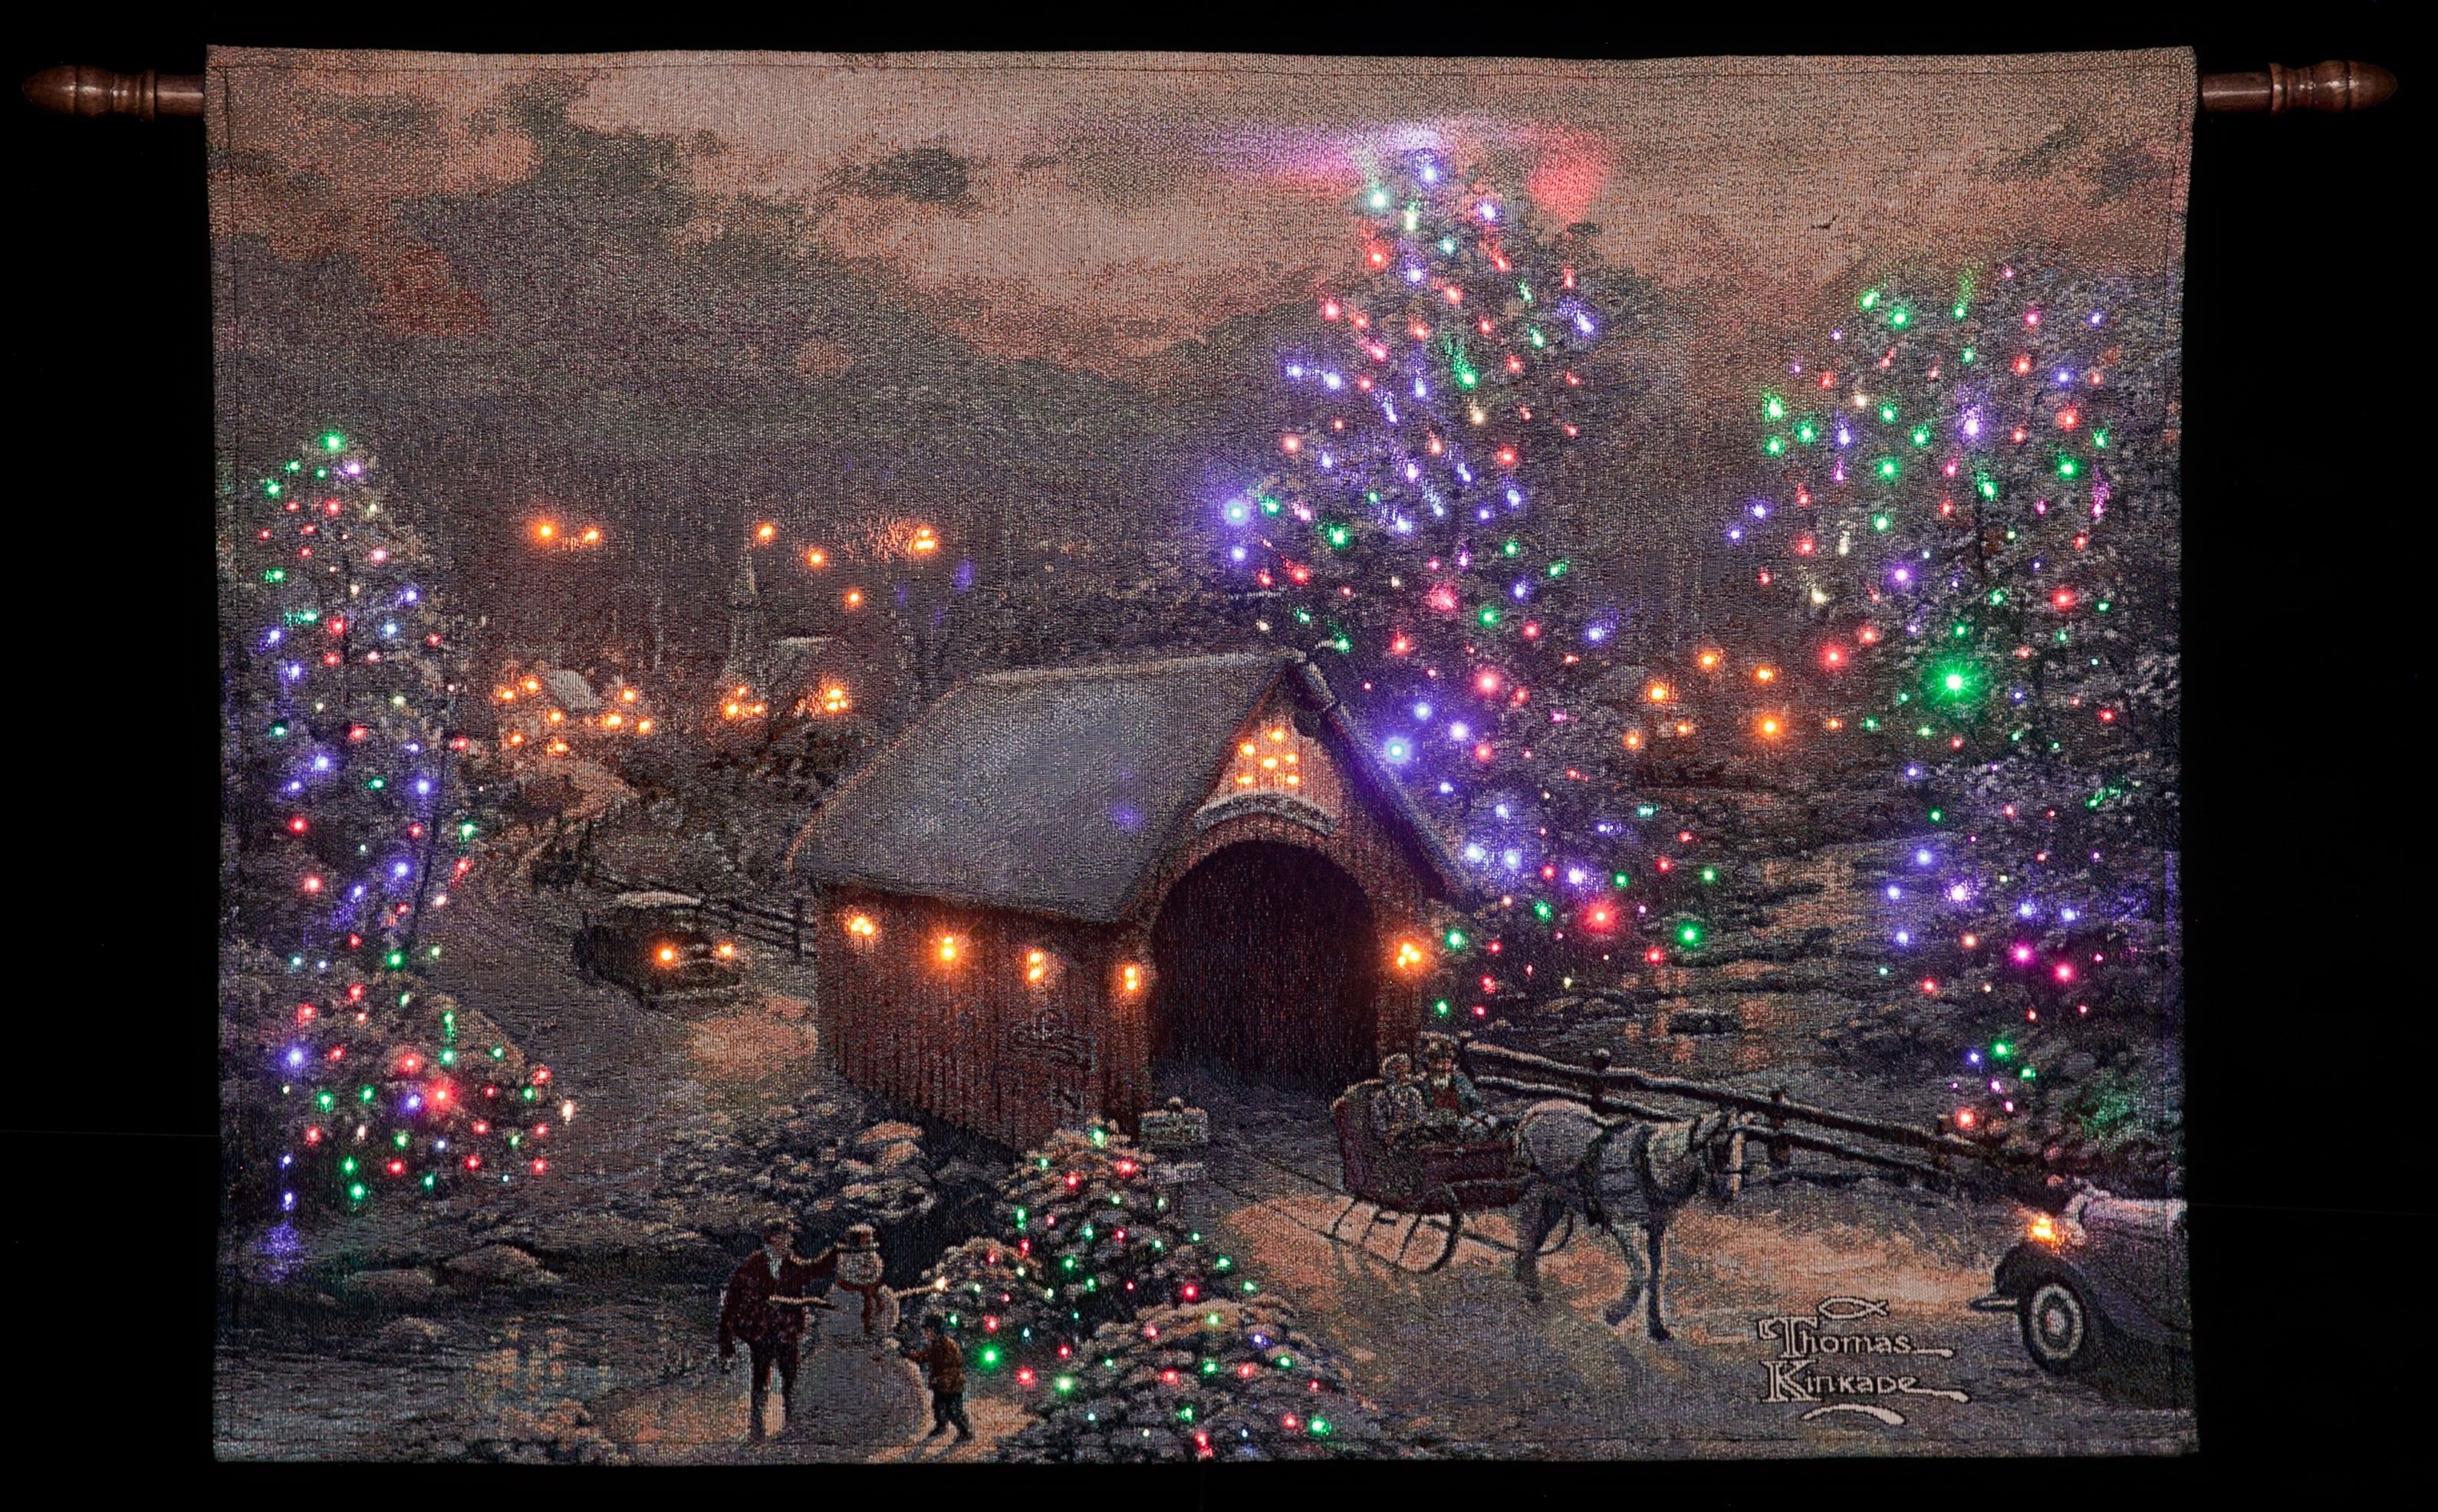 Wallpaper street Christmas lights painting Christmas Thomas Kinkade  painting Thomas Kinkade christmas decoration cottages christmas tree  Christmas trees cottages Kinkade Hometown Christmas Christmas wreath  images for desktop section 